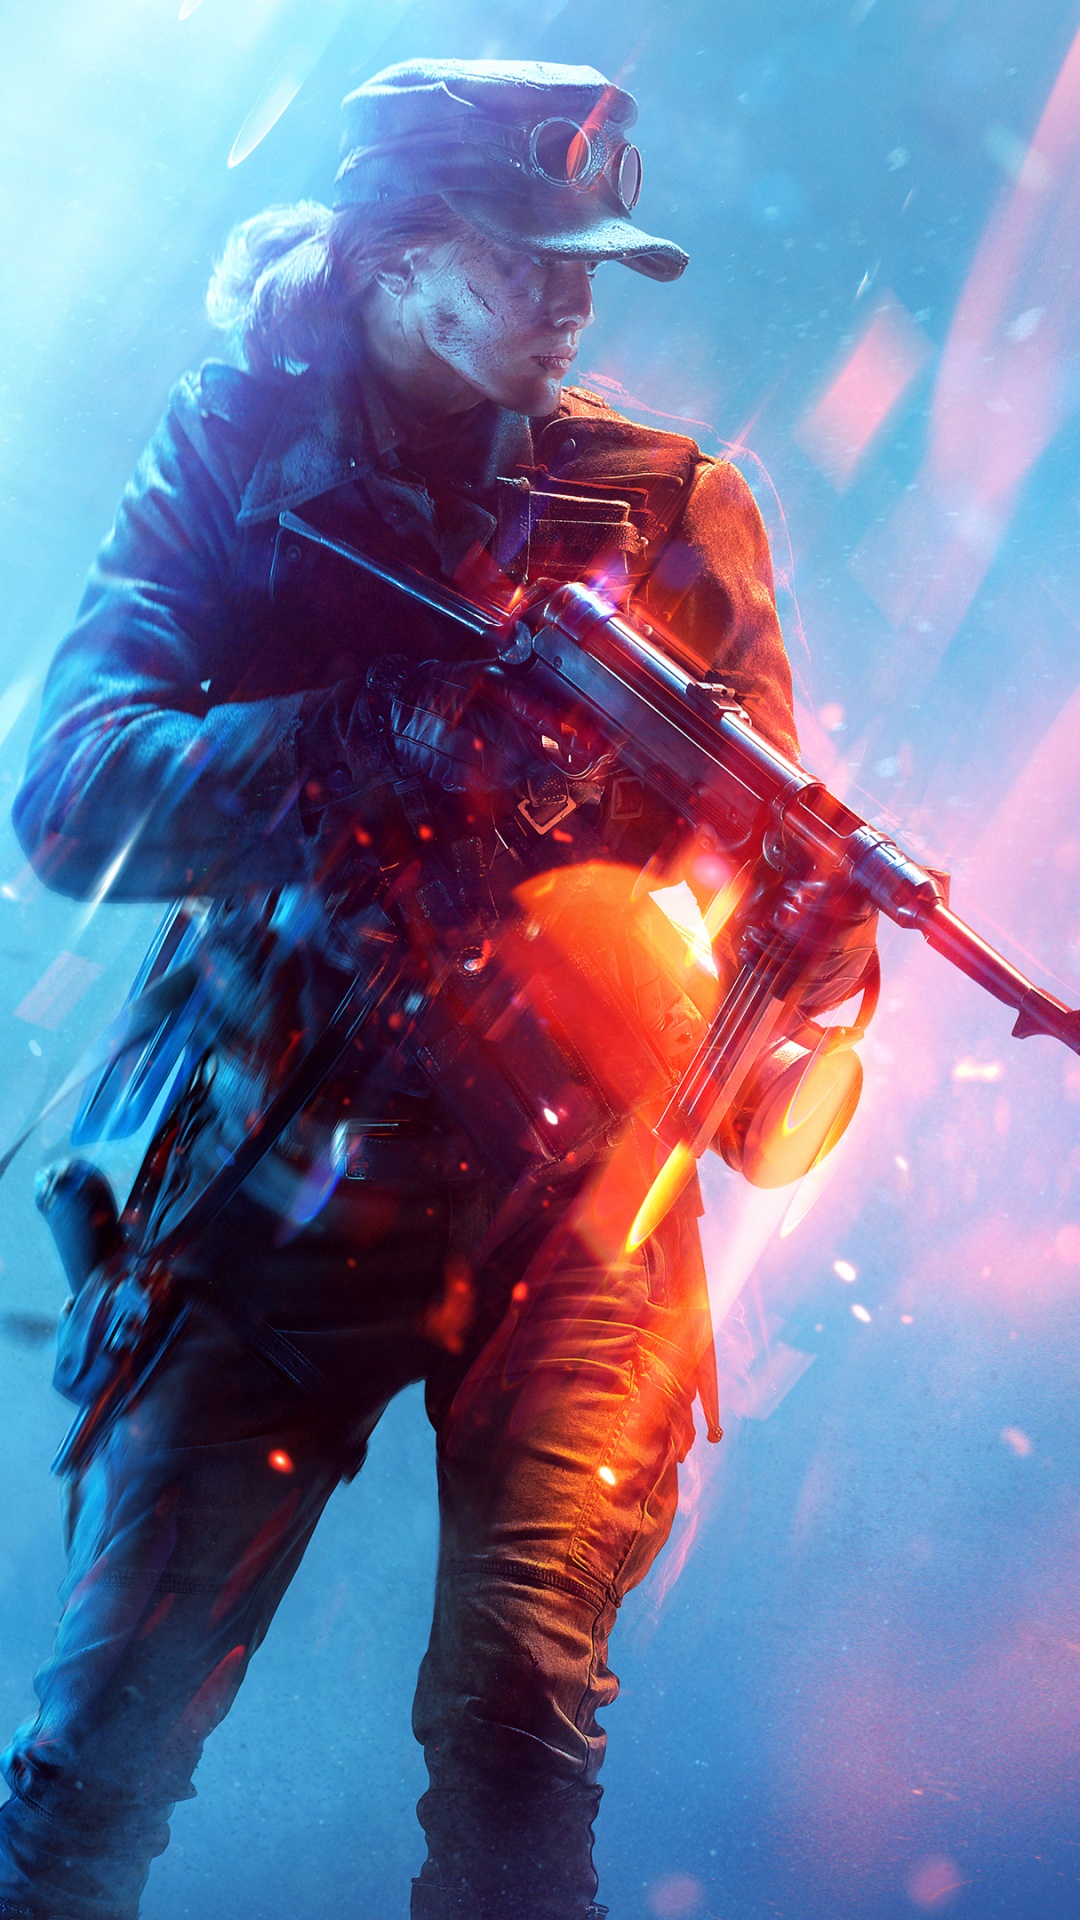 Battlefield V Wallpaper 4K, PlayStation 4, Xbox One, PC Games, 2020 Games, Games, 1278